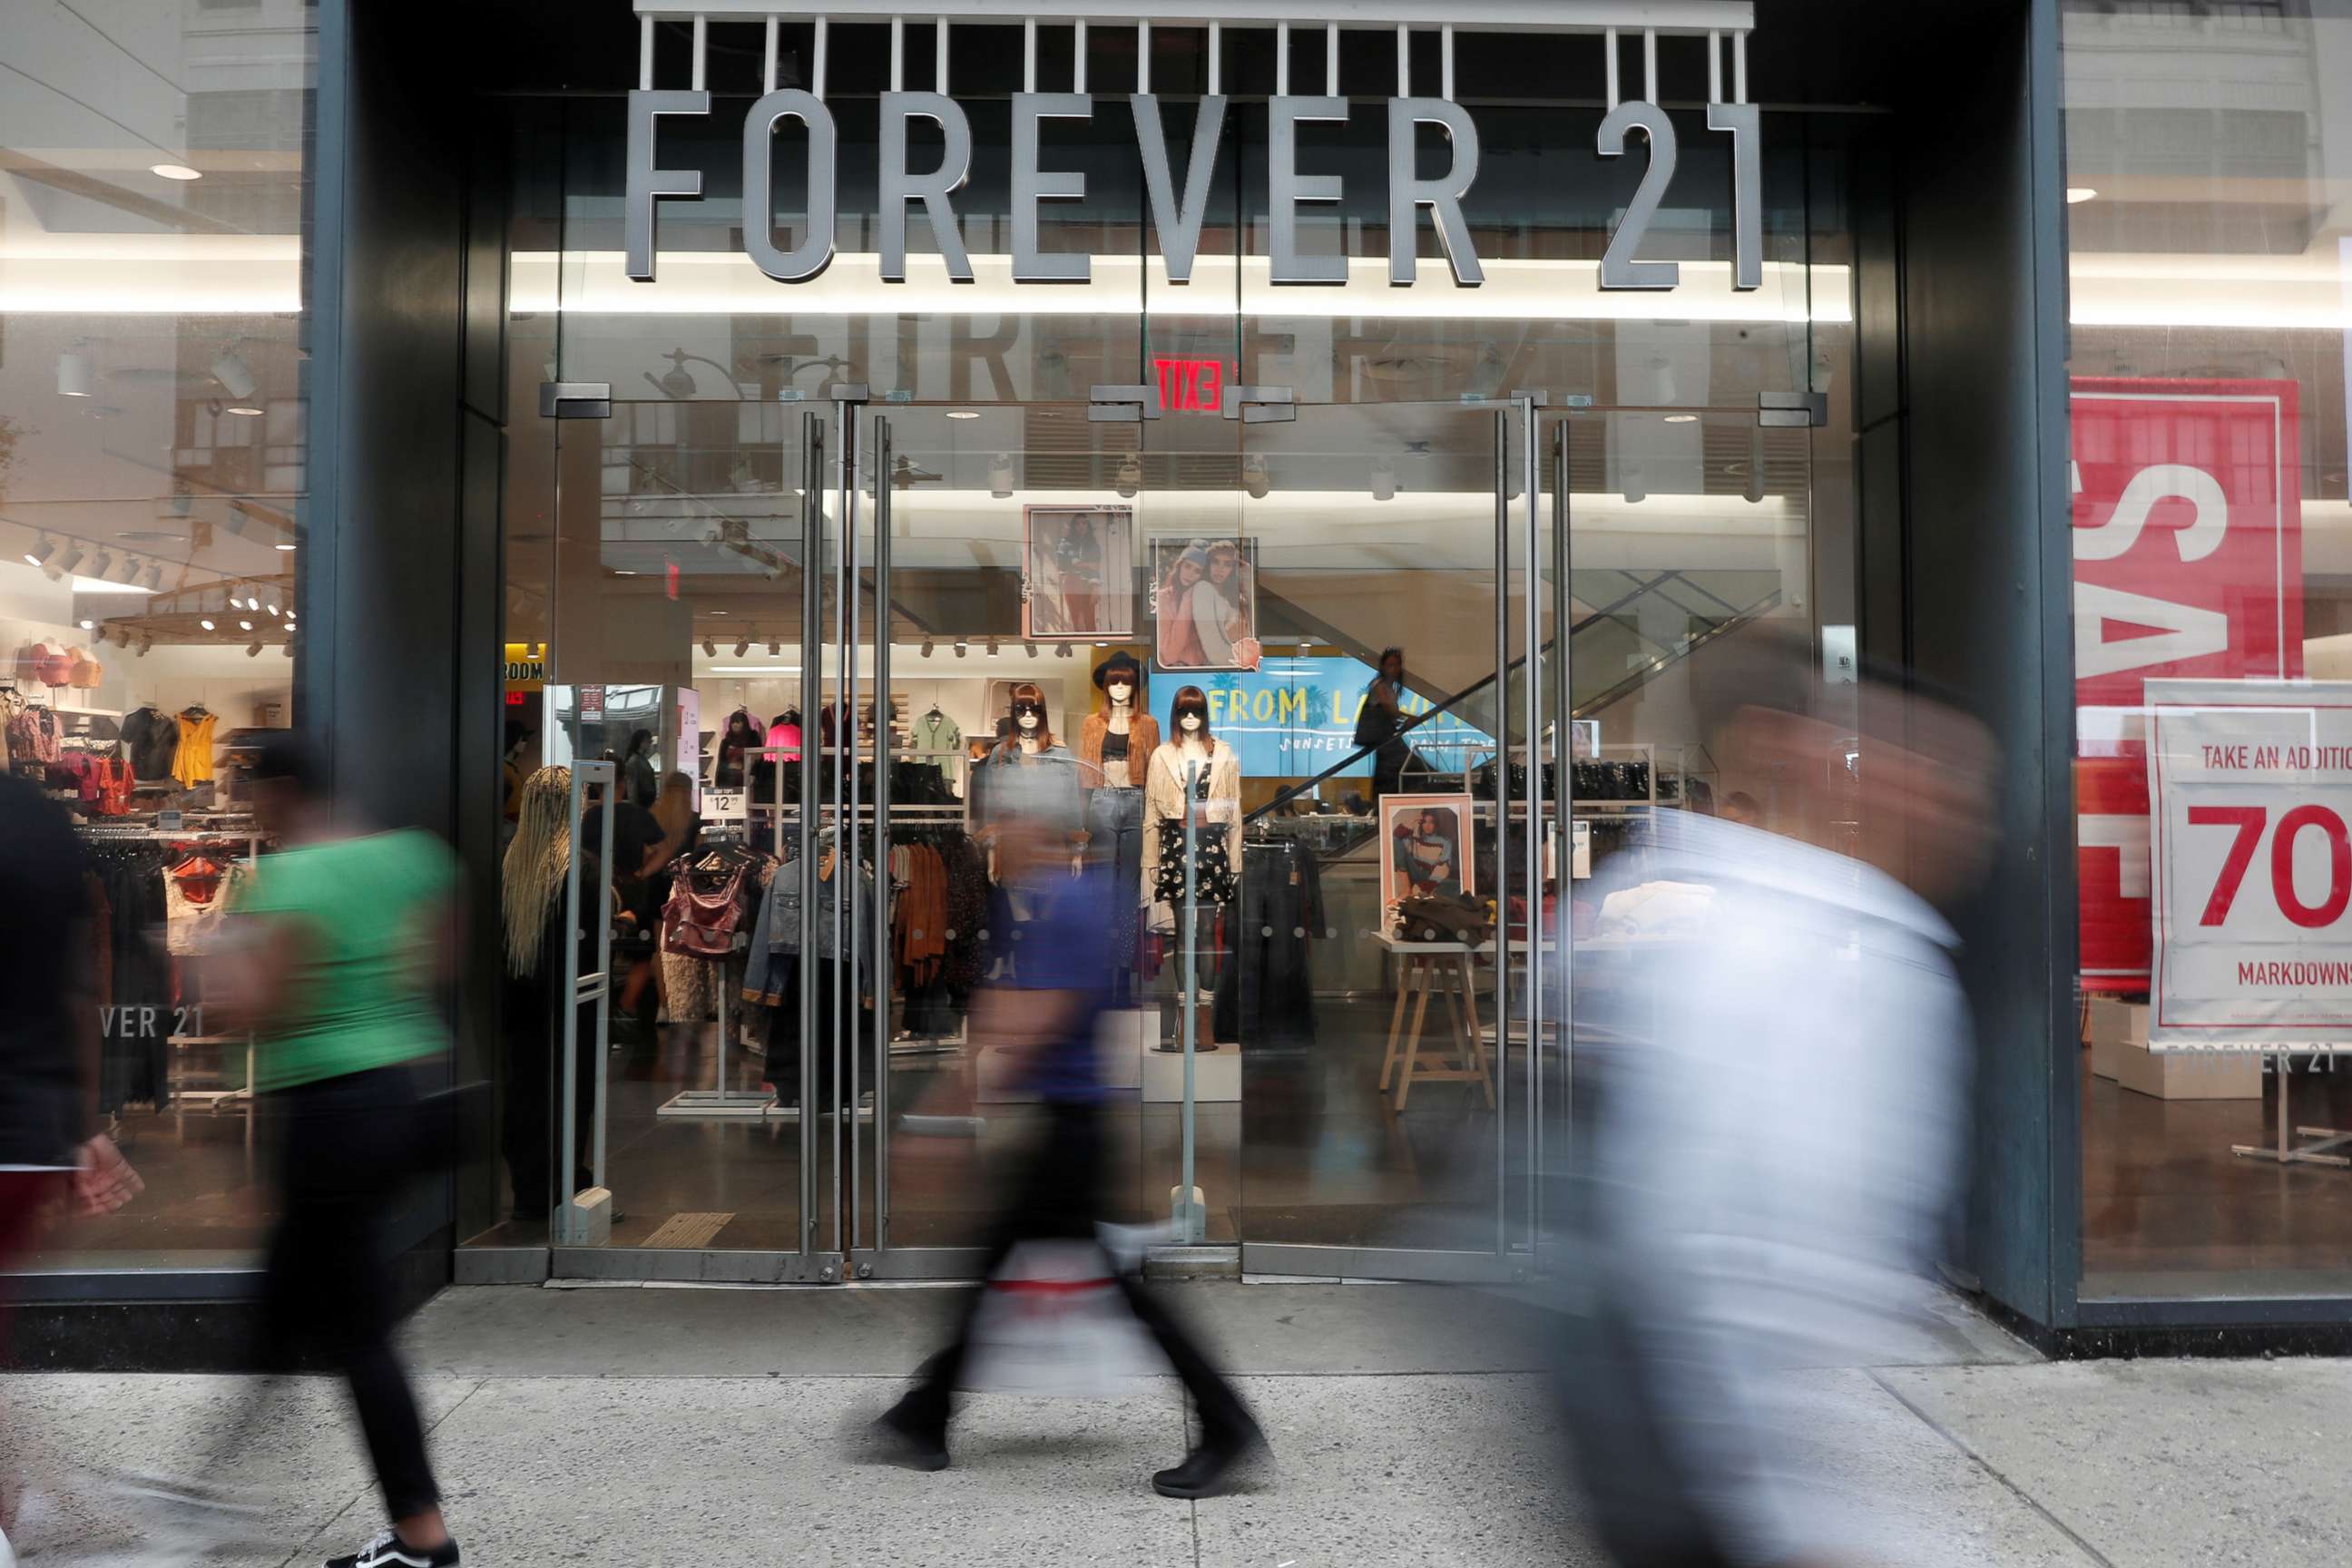 Bankrupt Forever 21 is closing 200 stores